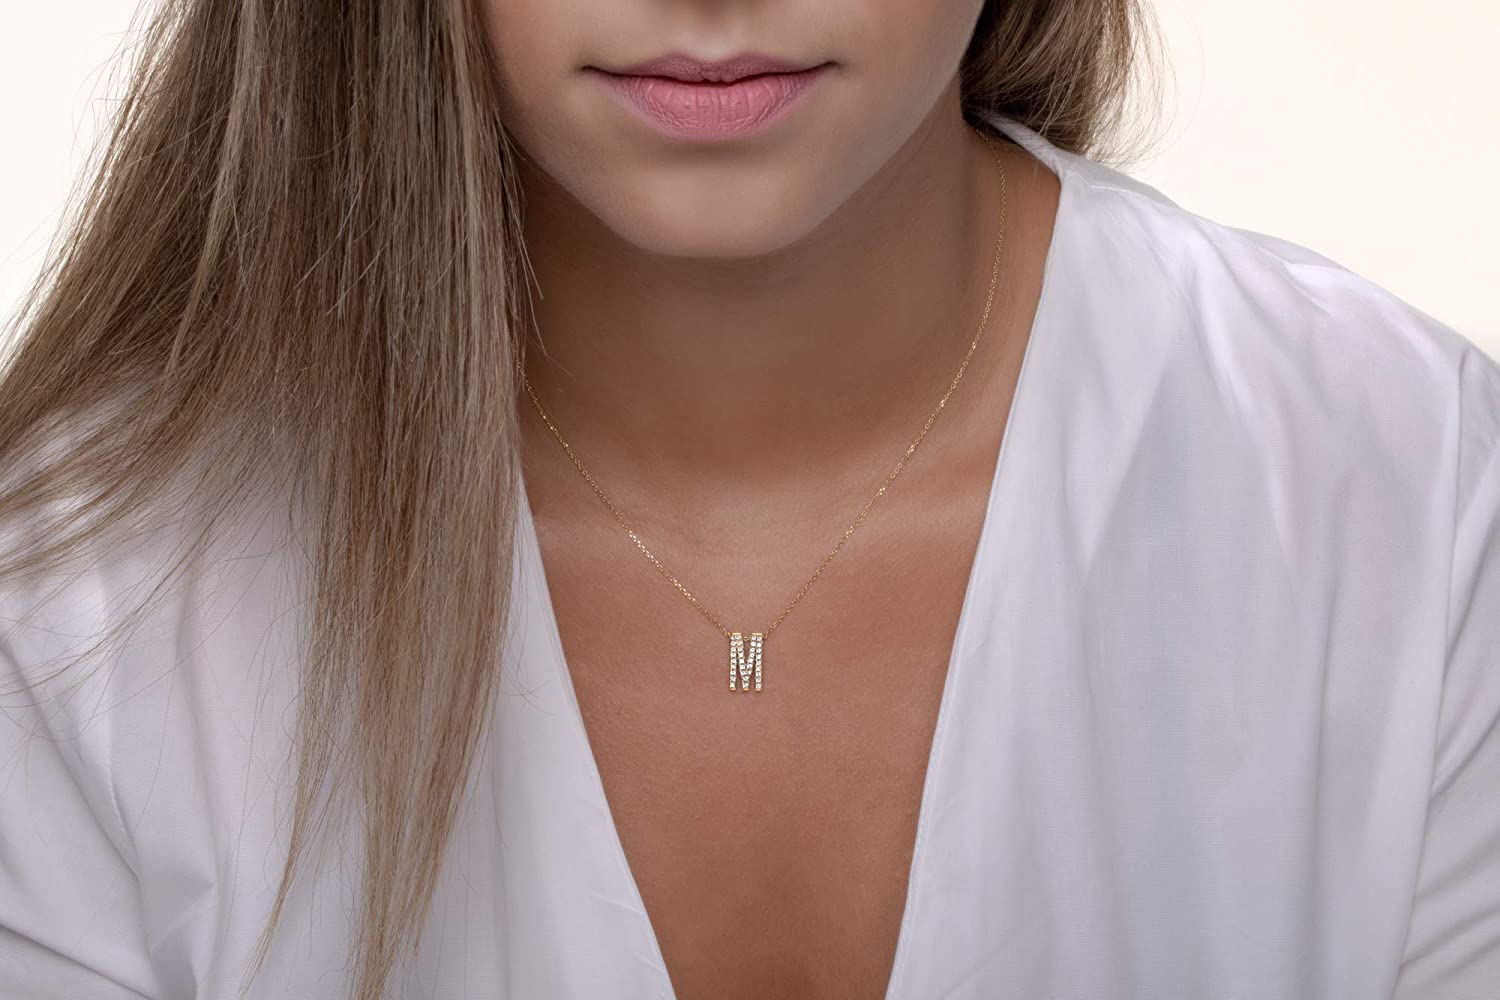 Large Initial Necklace - Big Letter Necklace